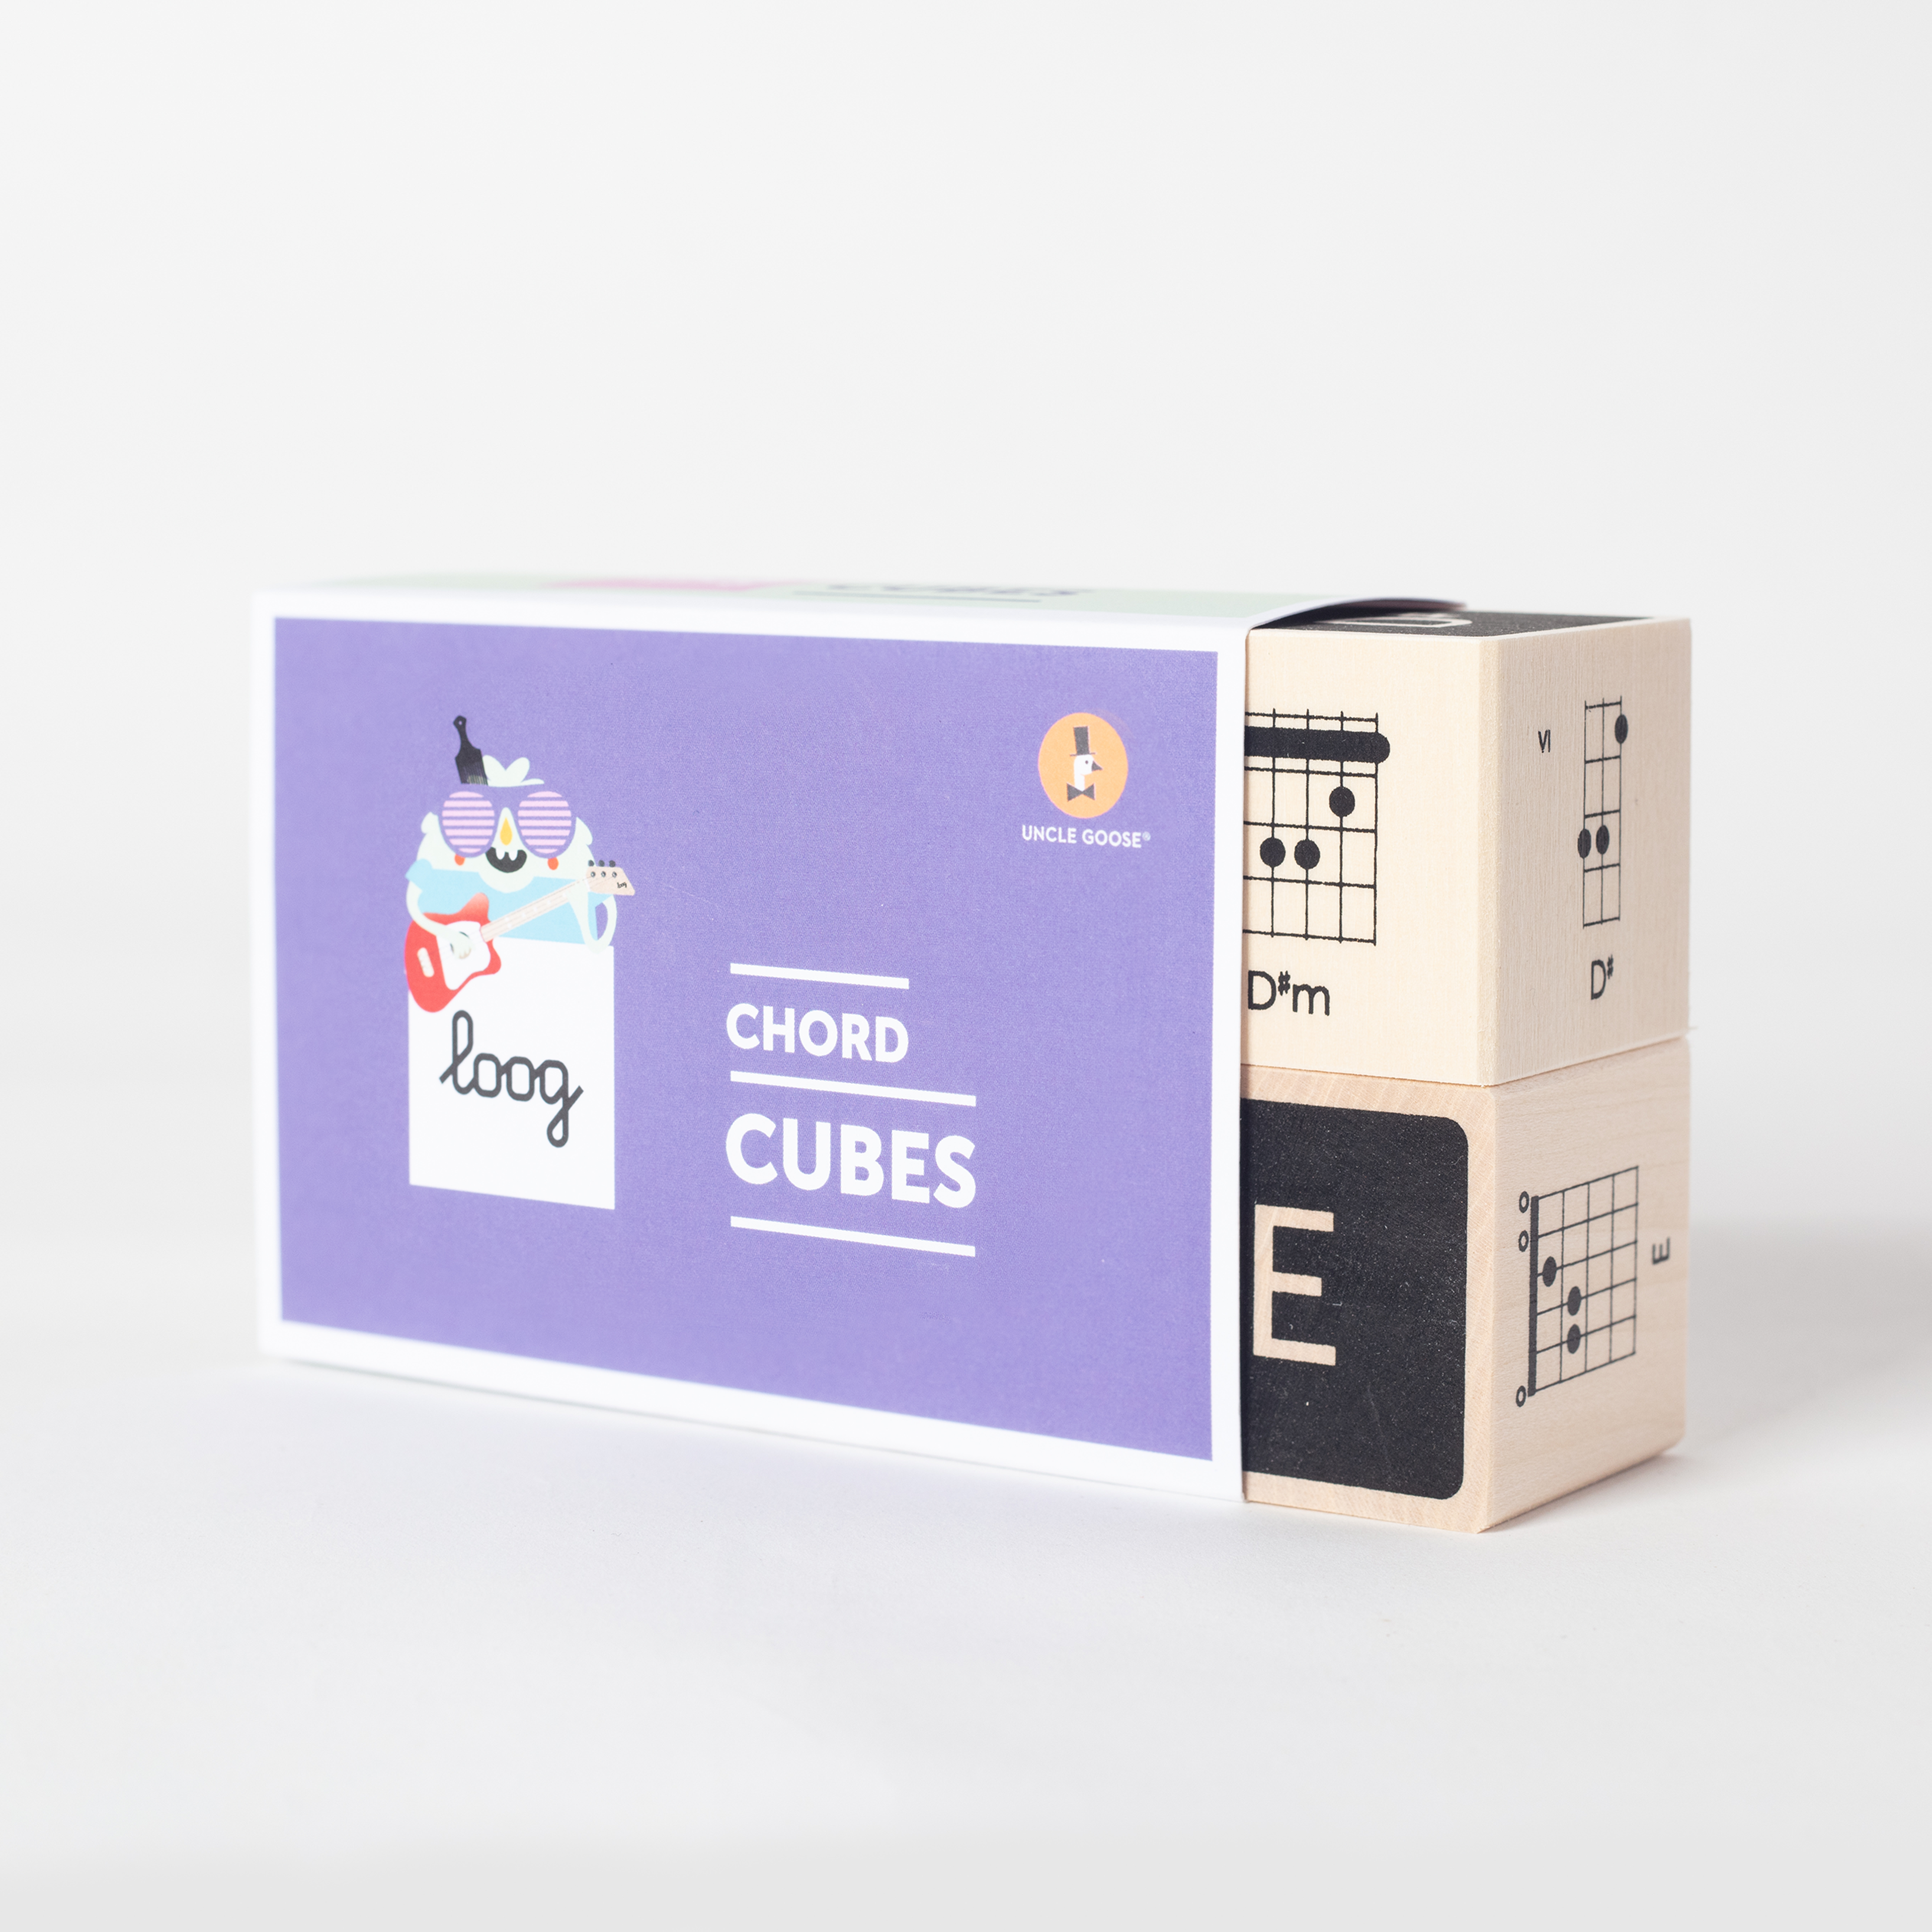 Chord Cubes by Uncle Goose